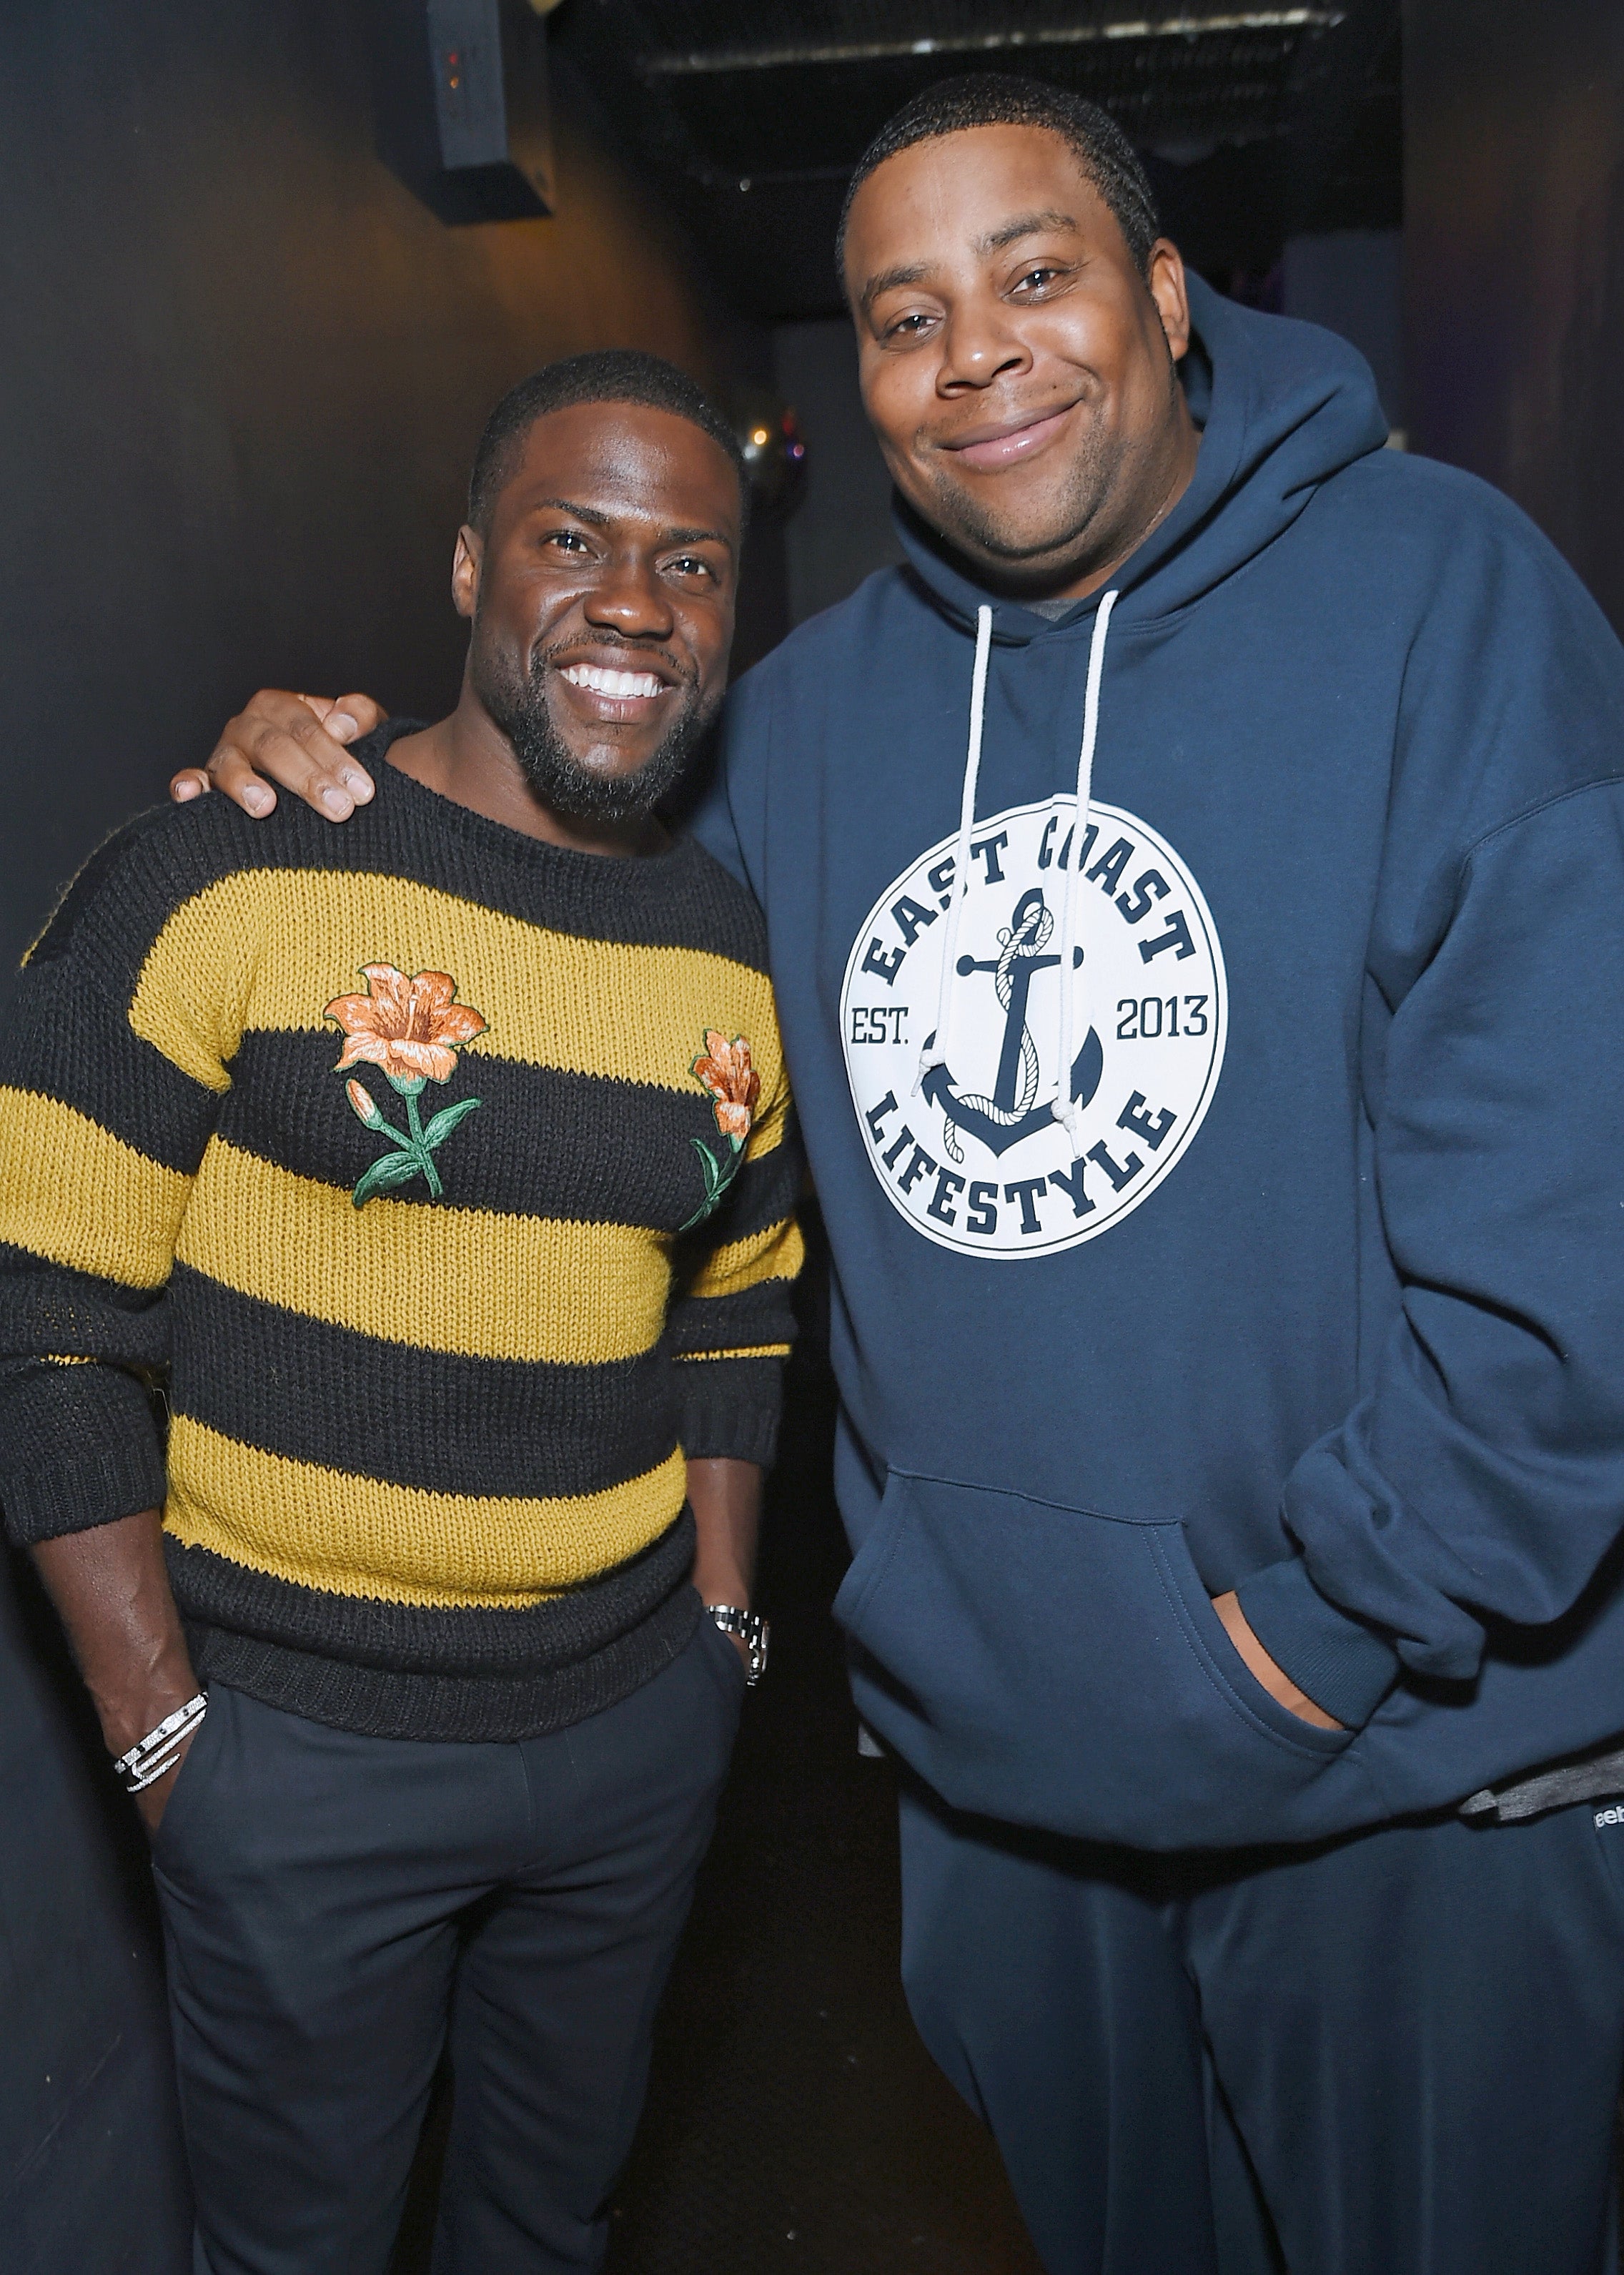  Kevin Hart and Kenan Thompson, Toya Wright, Chance the Rapper and More!
